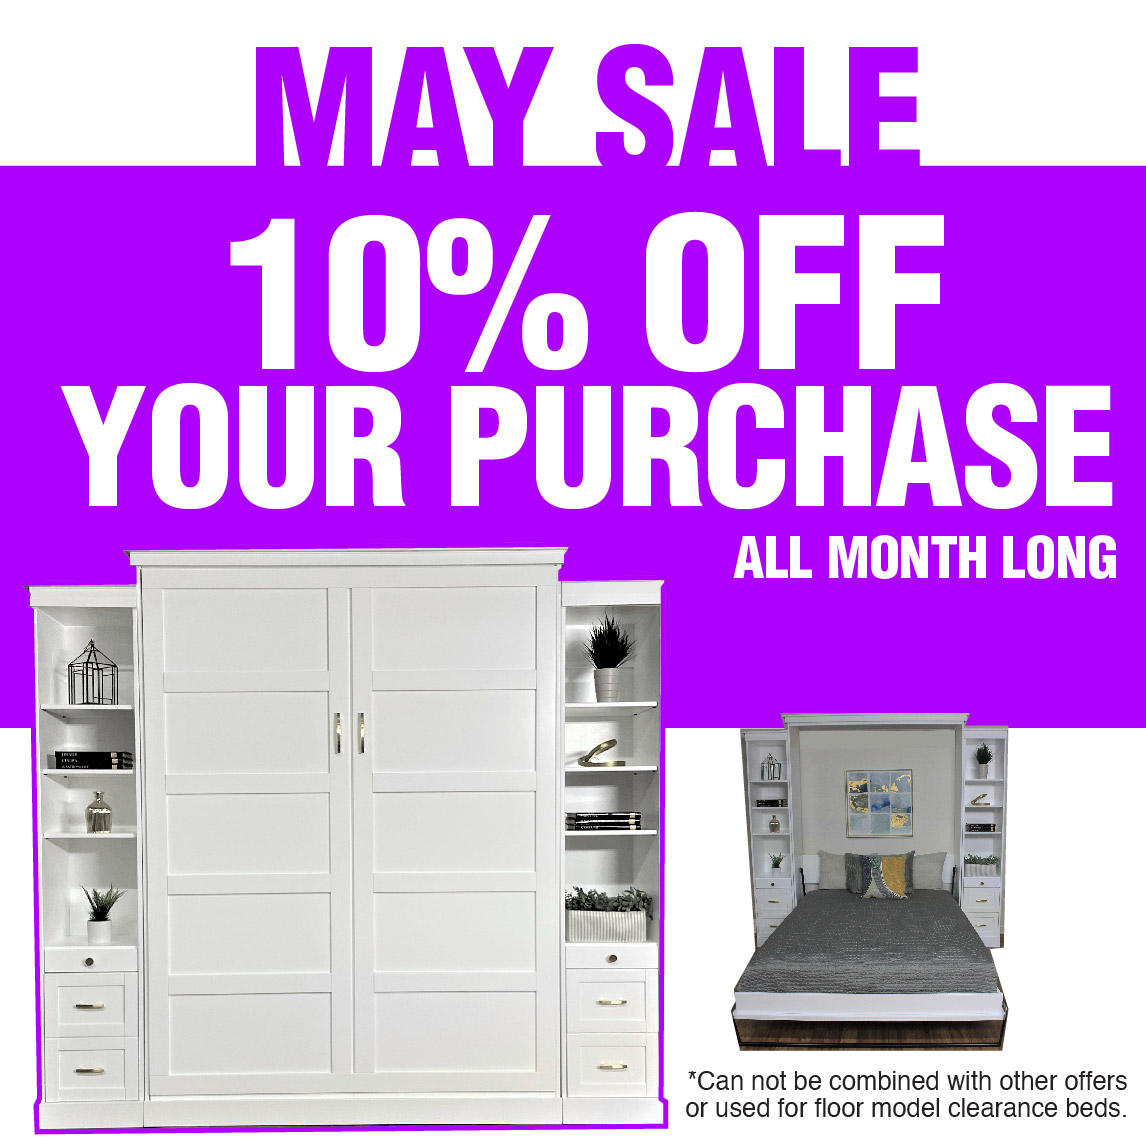 Buy a Wall Bed or Murphy bed in May 2022 and save!